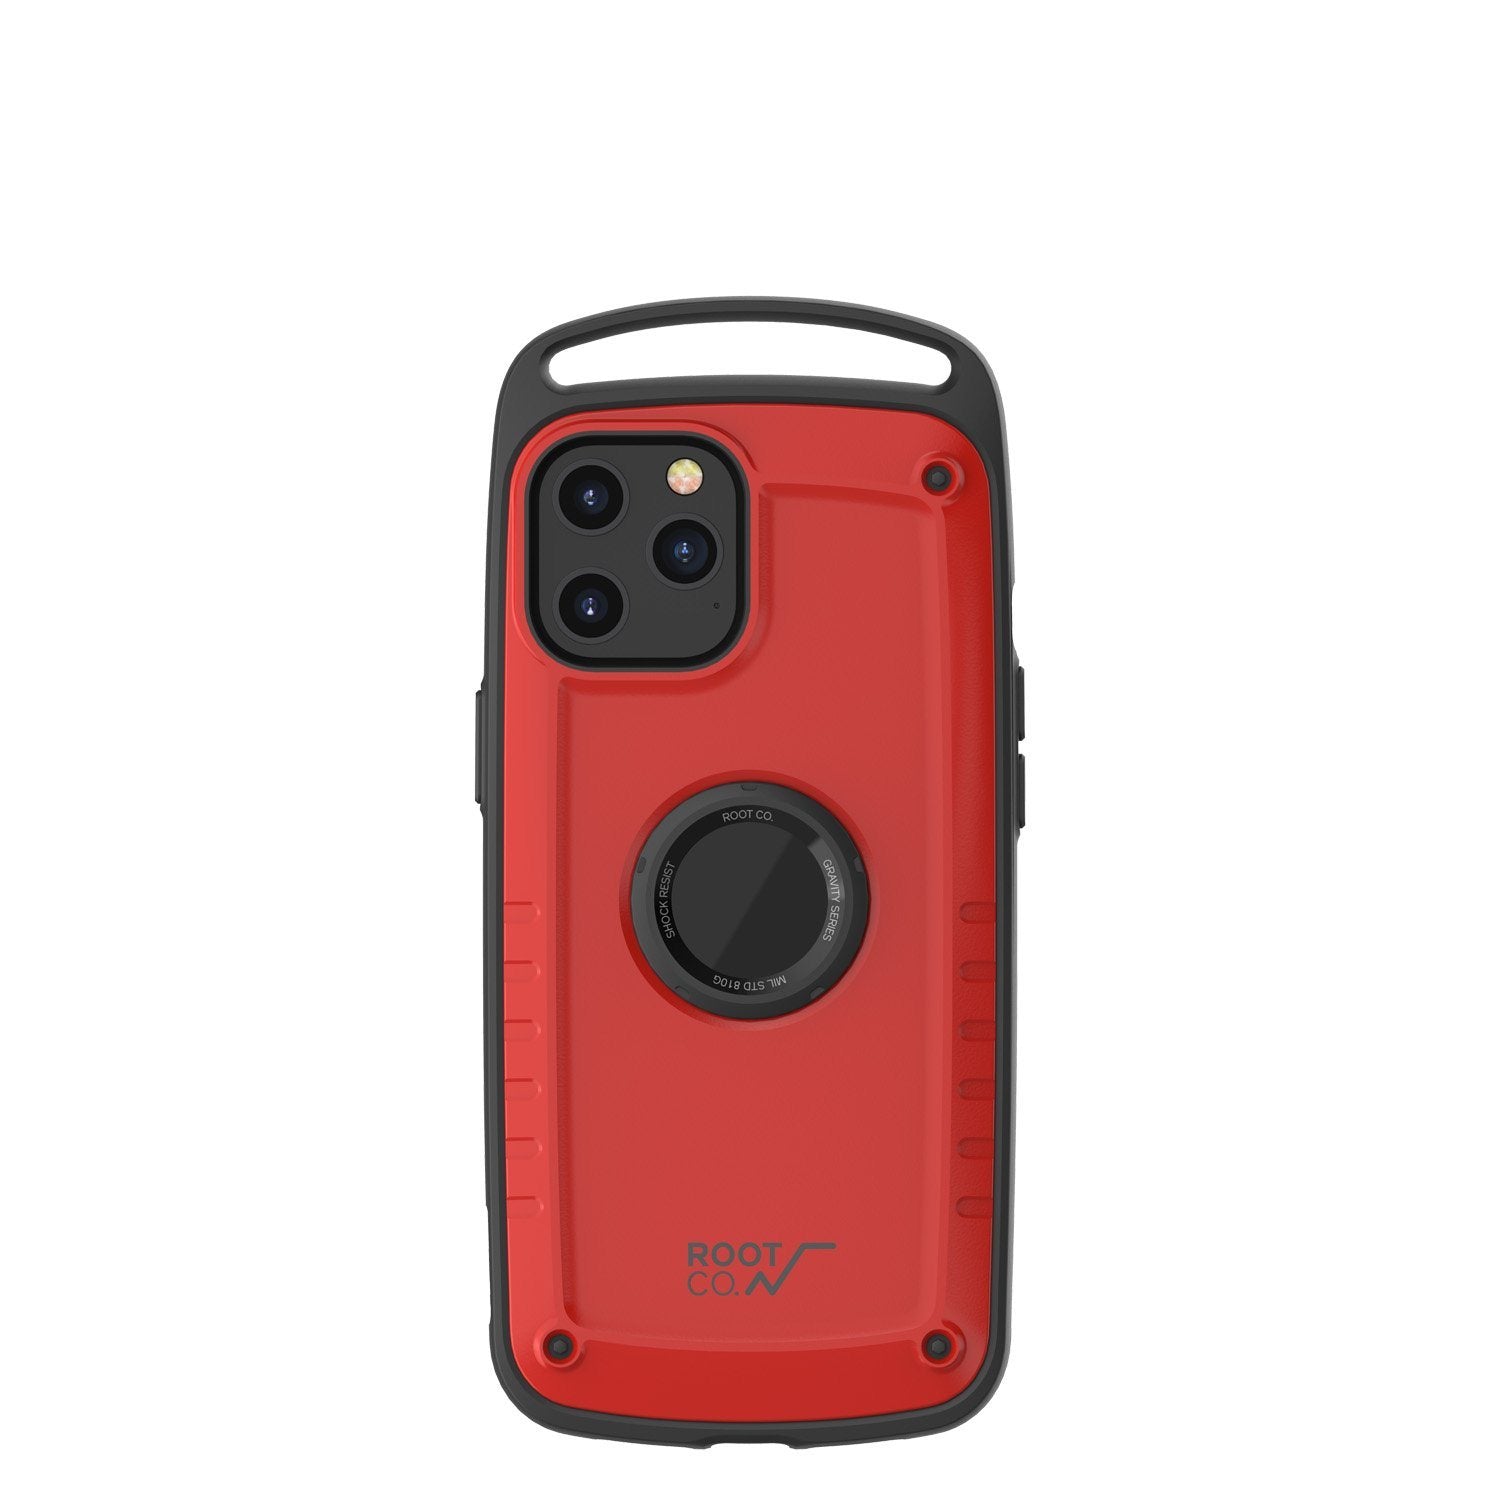 ROOT CO. Gravity Shock Resist Case Pro for iPhone 12 Pro Max 6.7"(2020), Gloss Red Default ROOT CO. 